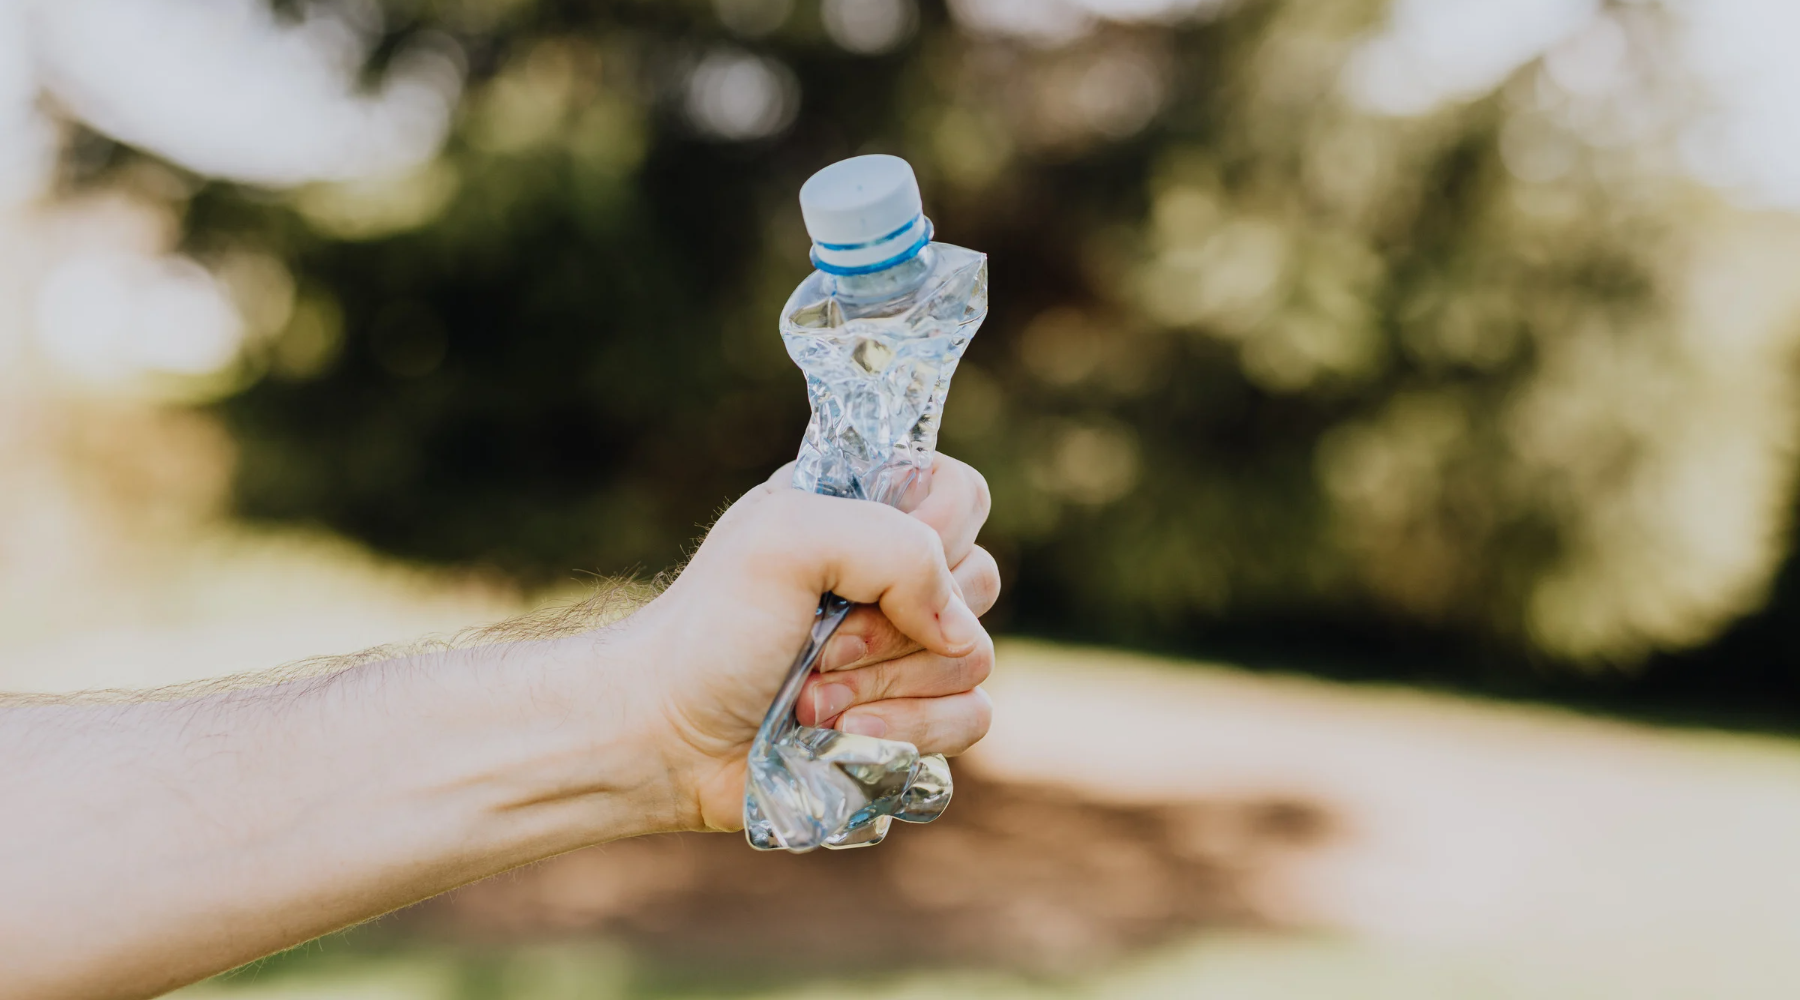 A hand forcefully squeezing an empty plastic water bottle.